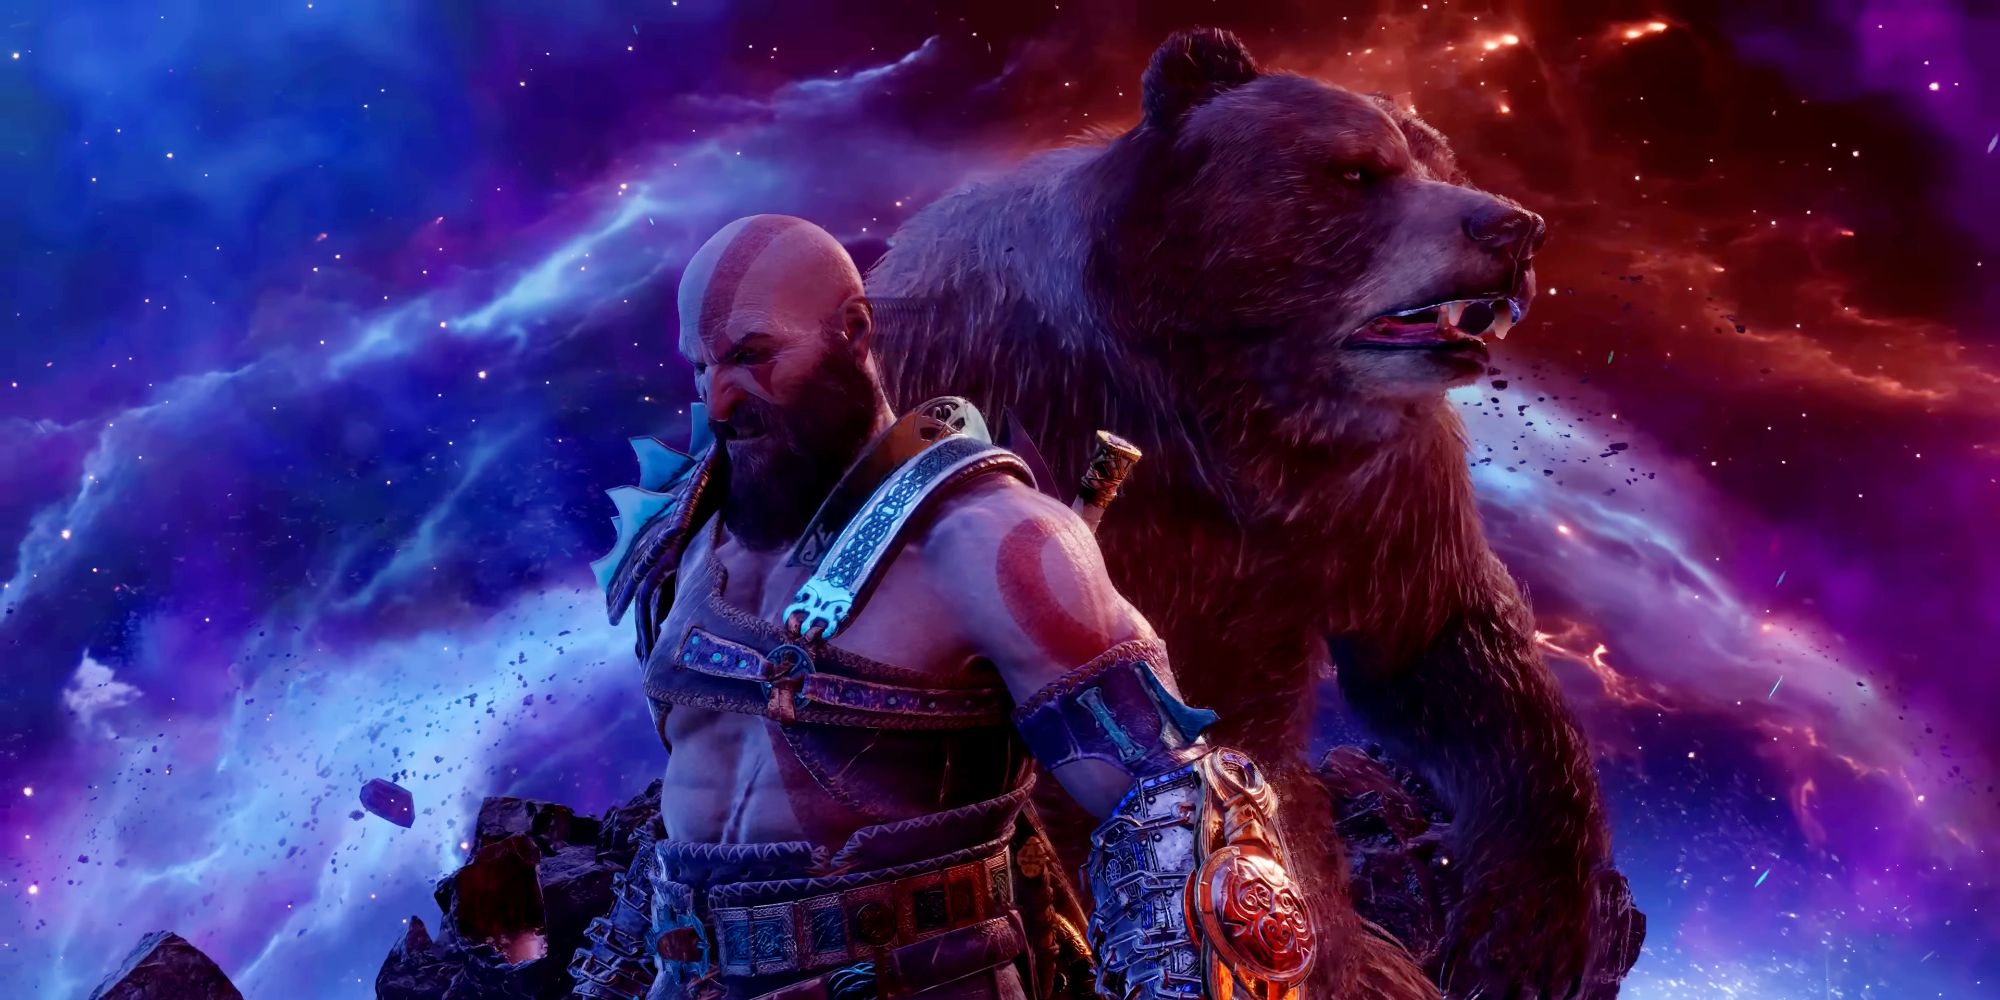 Kratos next to Atreus in his bear form in God of War Ragnarok's Spark of the World area.